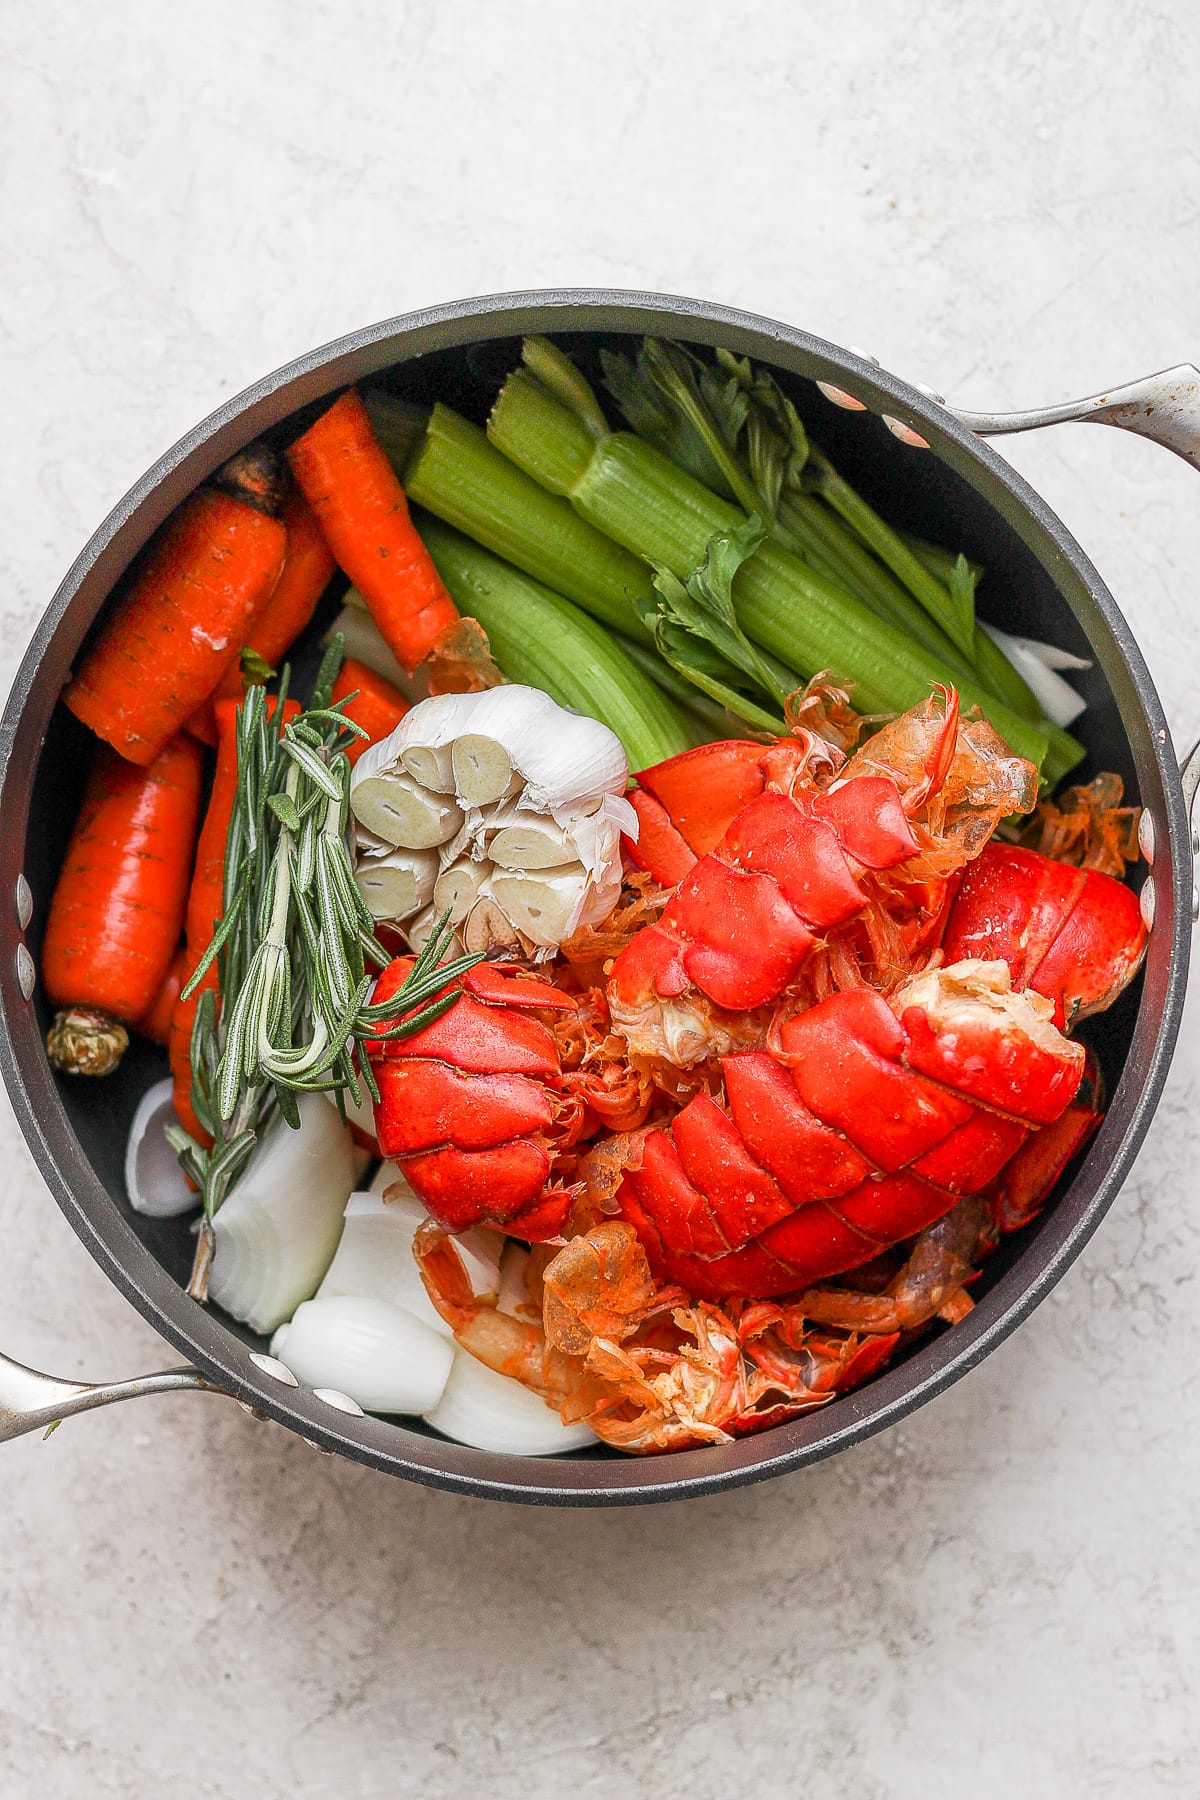 Dutch oven with seafood stock ingredients inside.